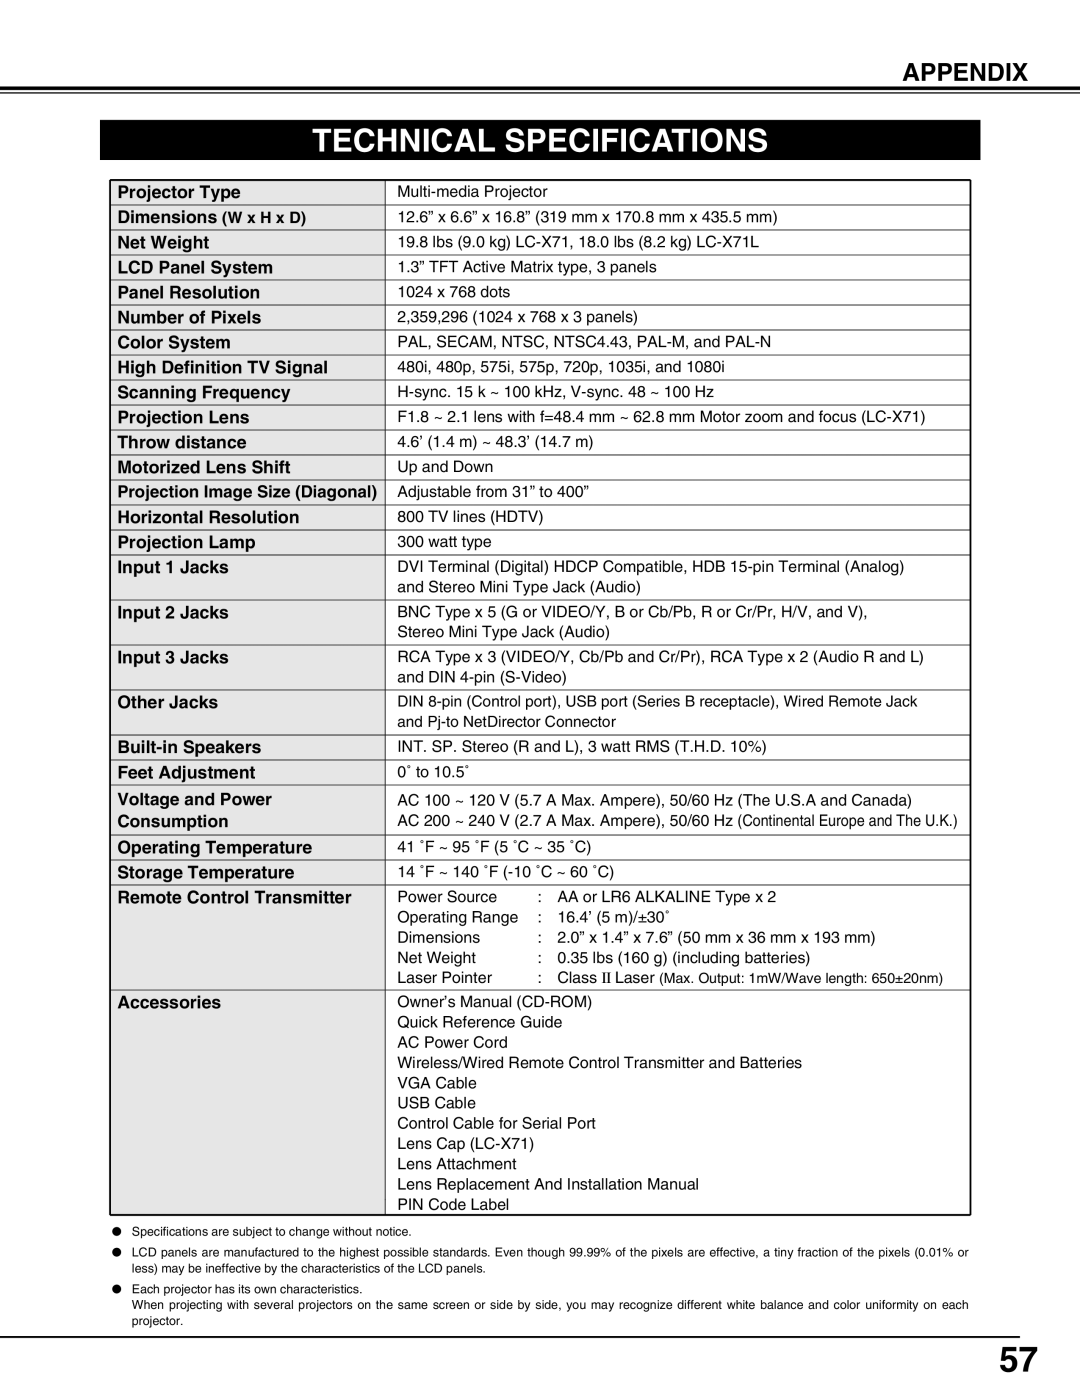 Eiki LC-X71L owner manual Technical Specifications 